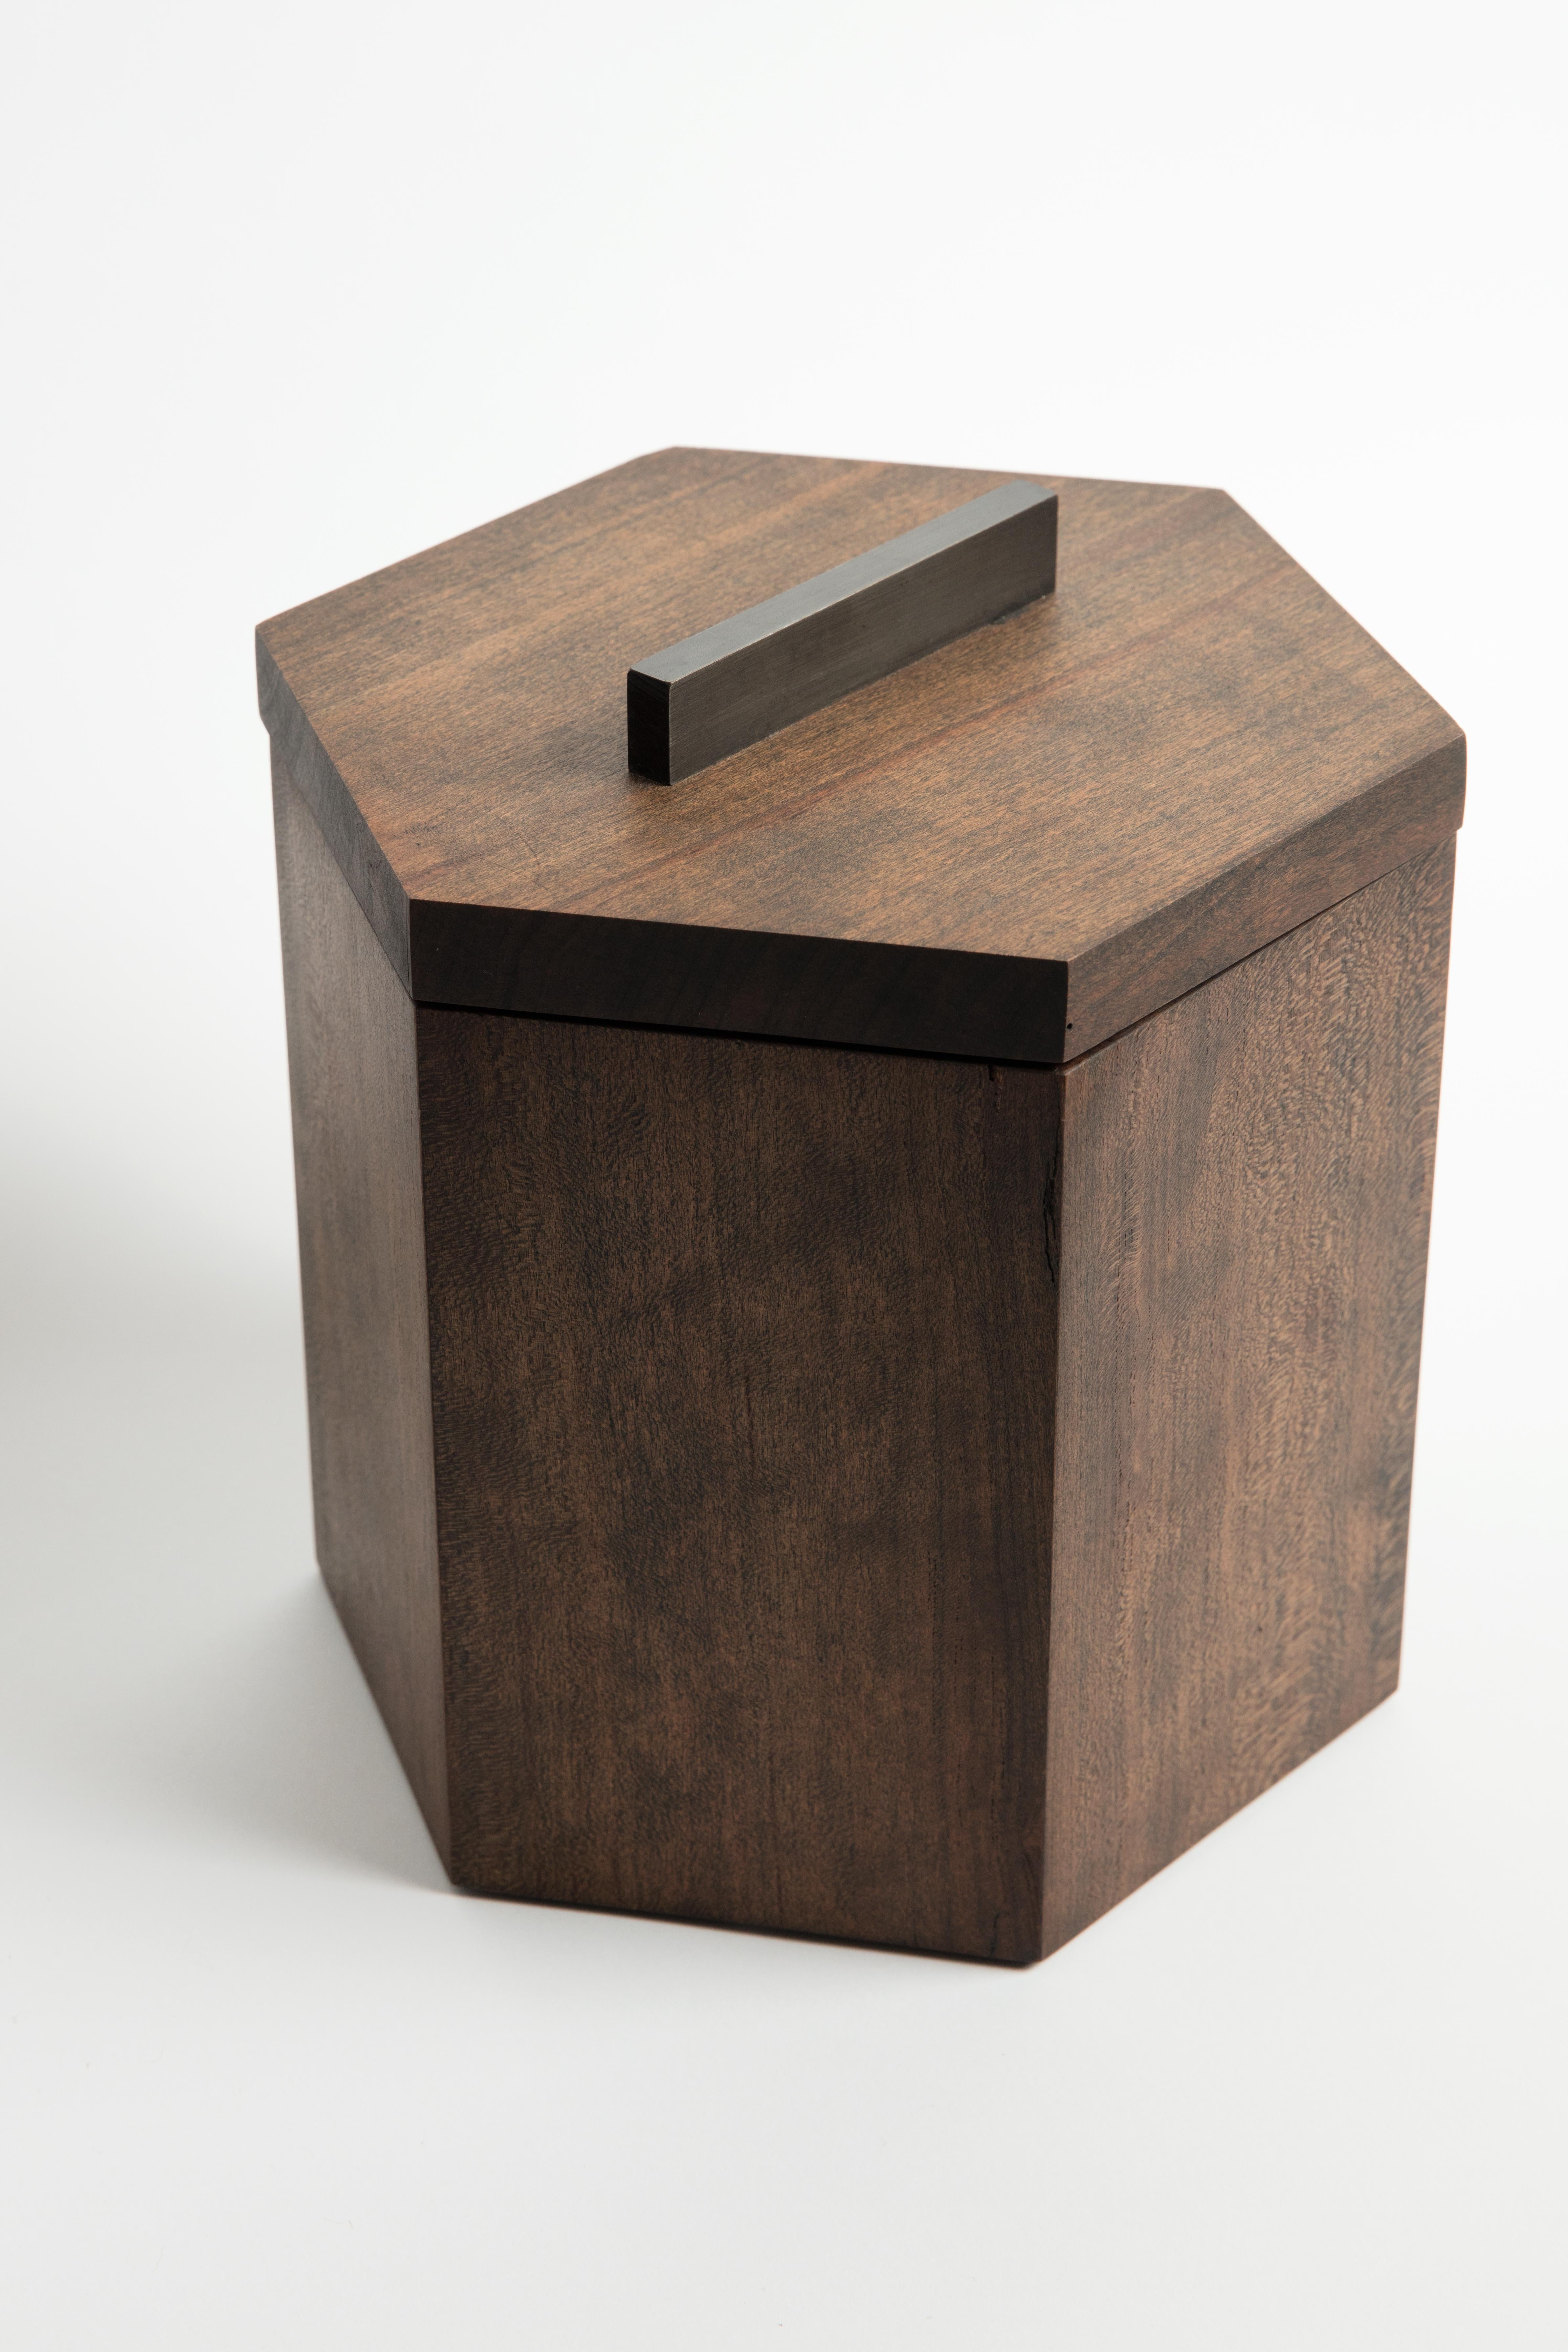 Our ebonized cherrywood ice bucket is handcrafted with solid cherry from Birmingham's urban forest. Modern geometric barware strikes a clean line on your counter. Store ice for cocktails or keep a bottle of your favorite white wine cool and crisp